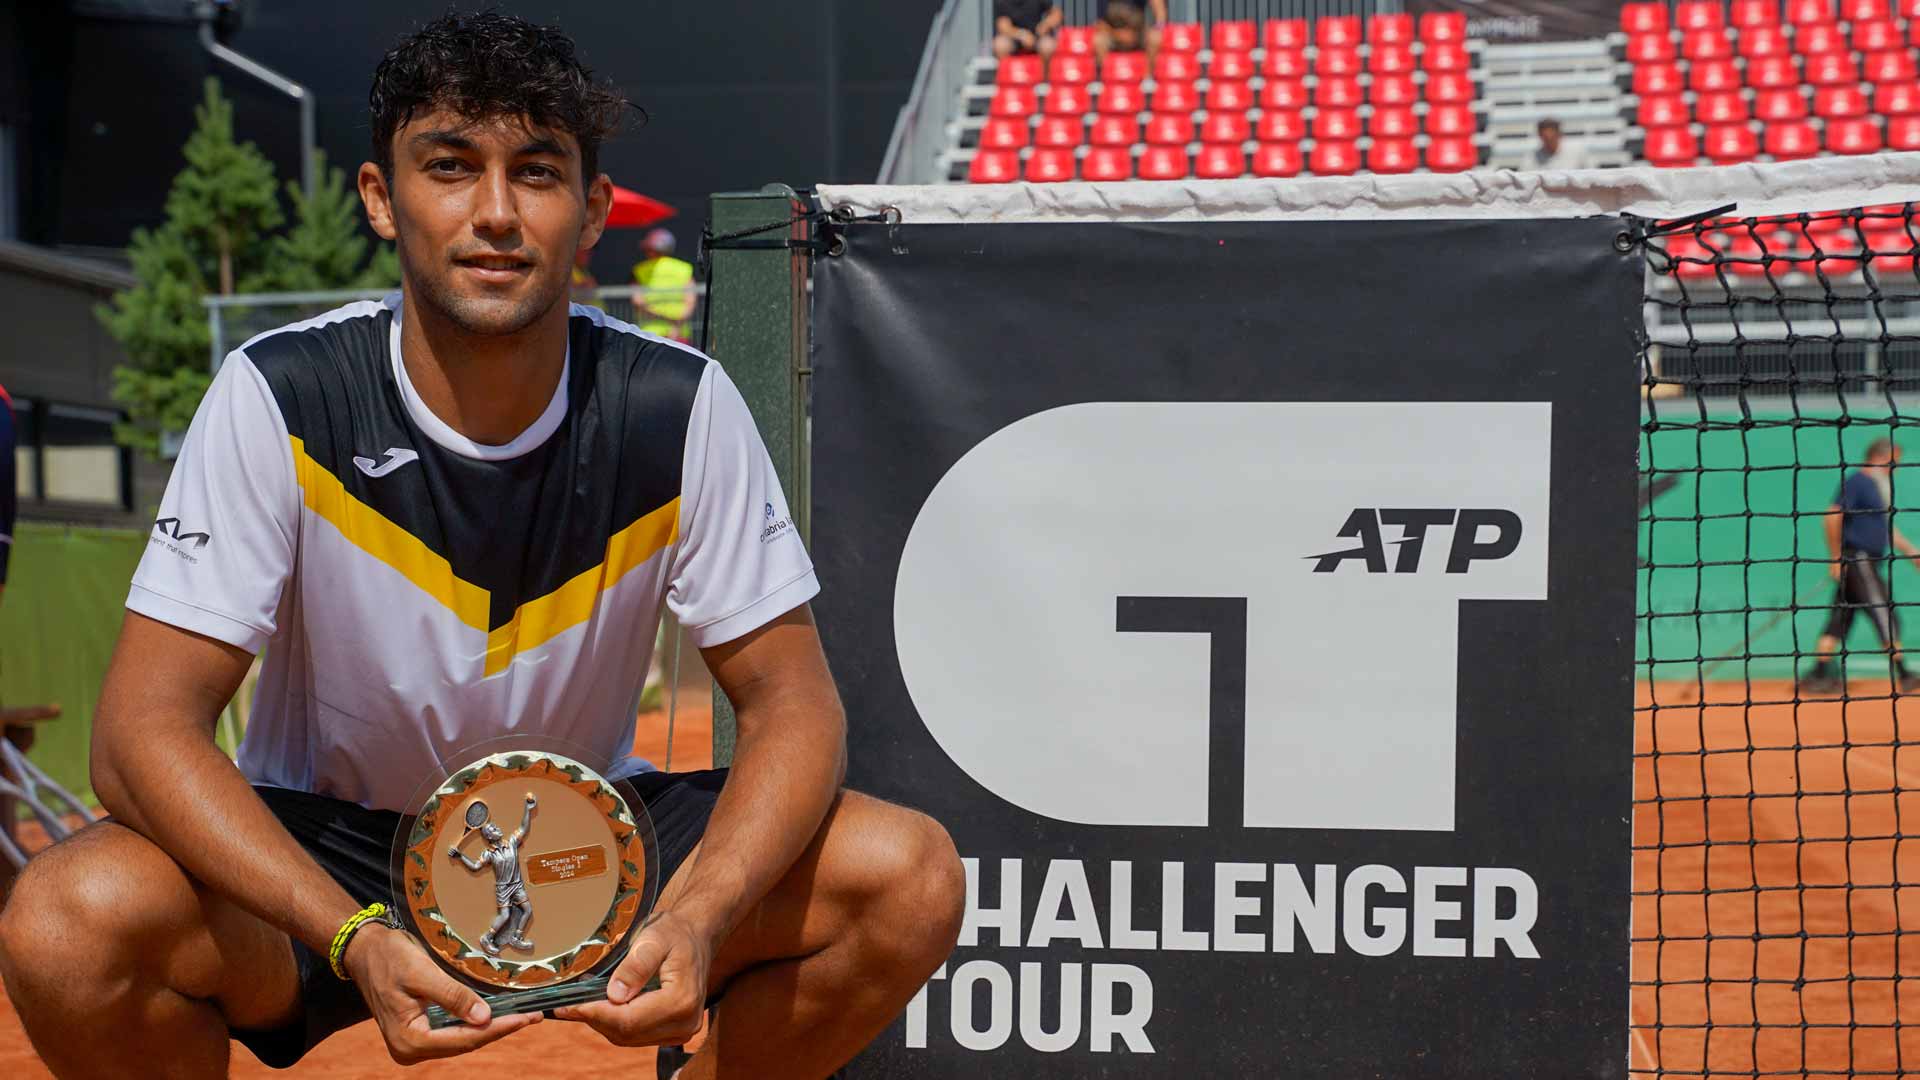 Daniel Rincon triumphs on the clay courts of Tampere, Finland.